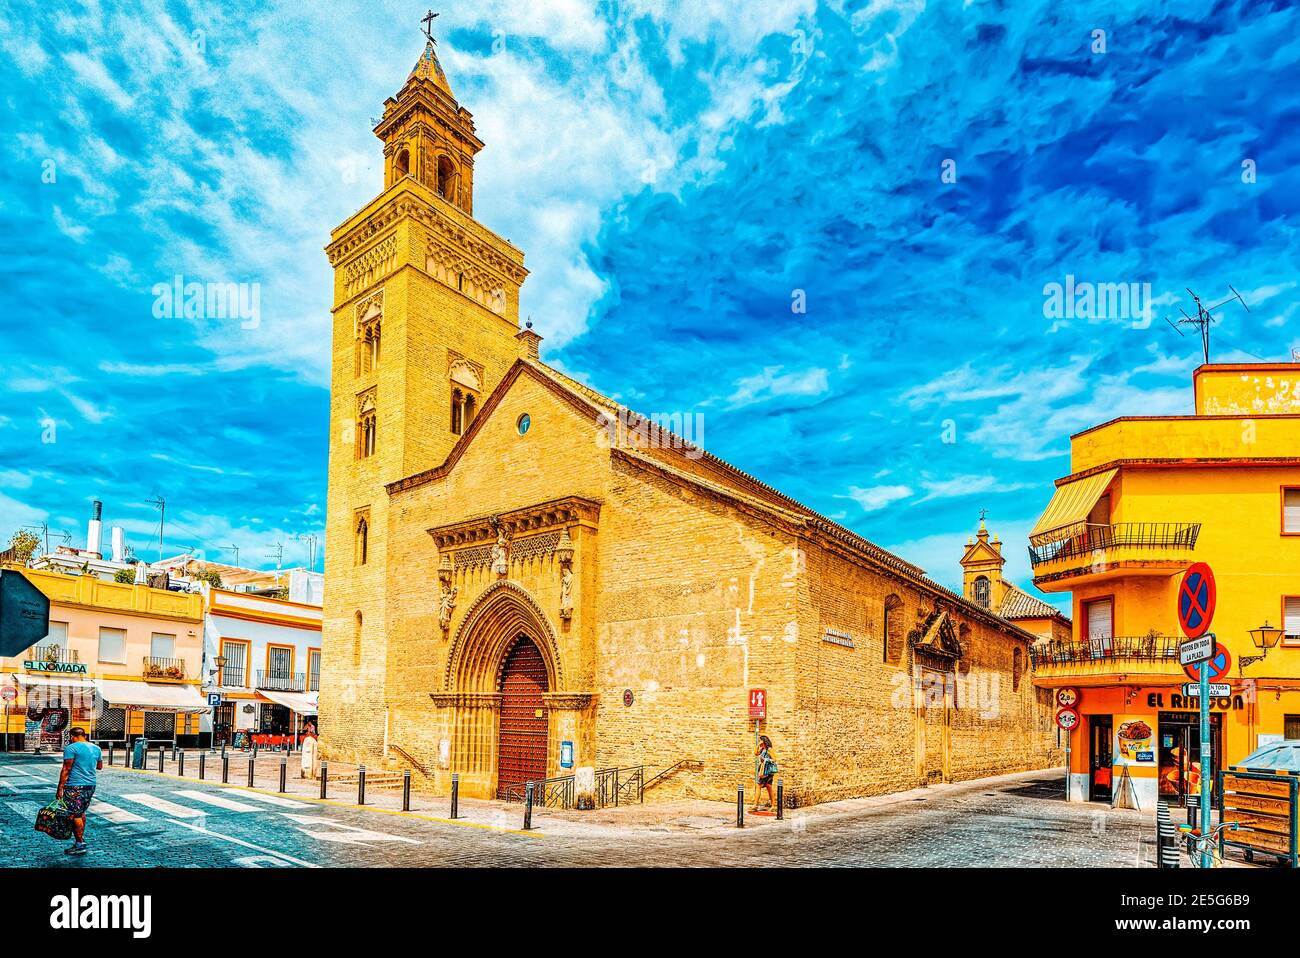 Seville, Spain - June 08,2017: Iglesia de San Marcos (Church of San Marcos) on St. Mark's Square (Plaza San Marcos) in downtown of the city Seville. S Stock Photo